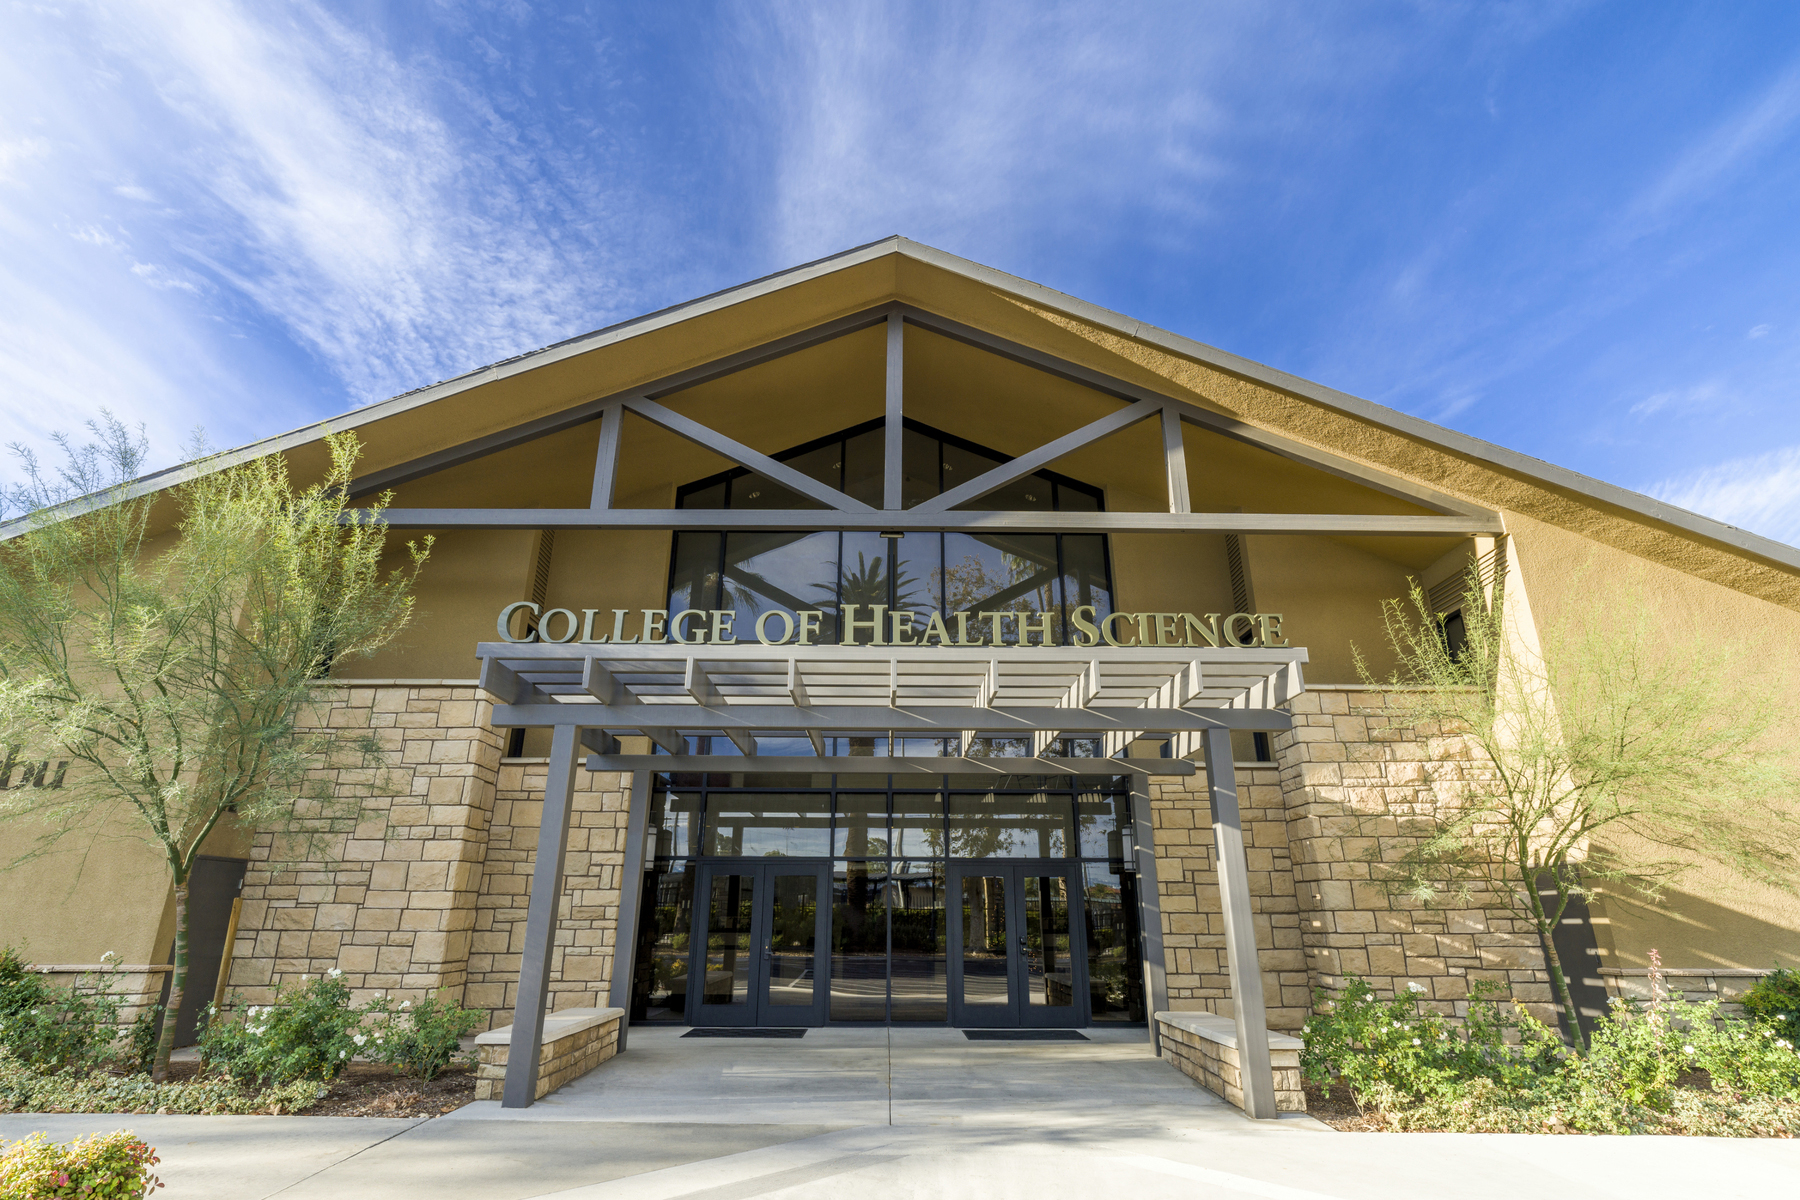 Entrance to CBU's College of Health Science building